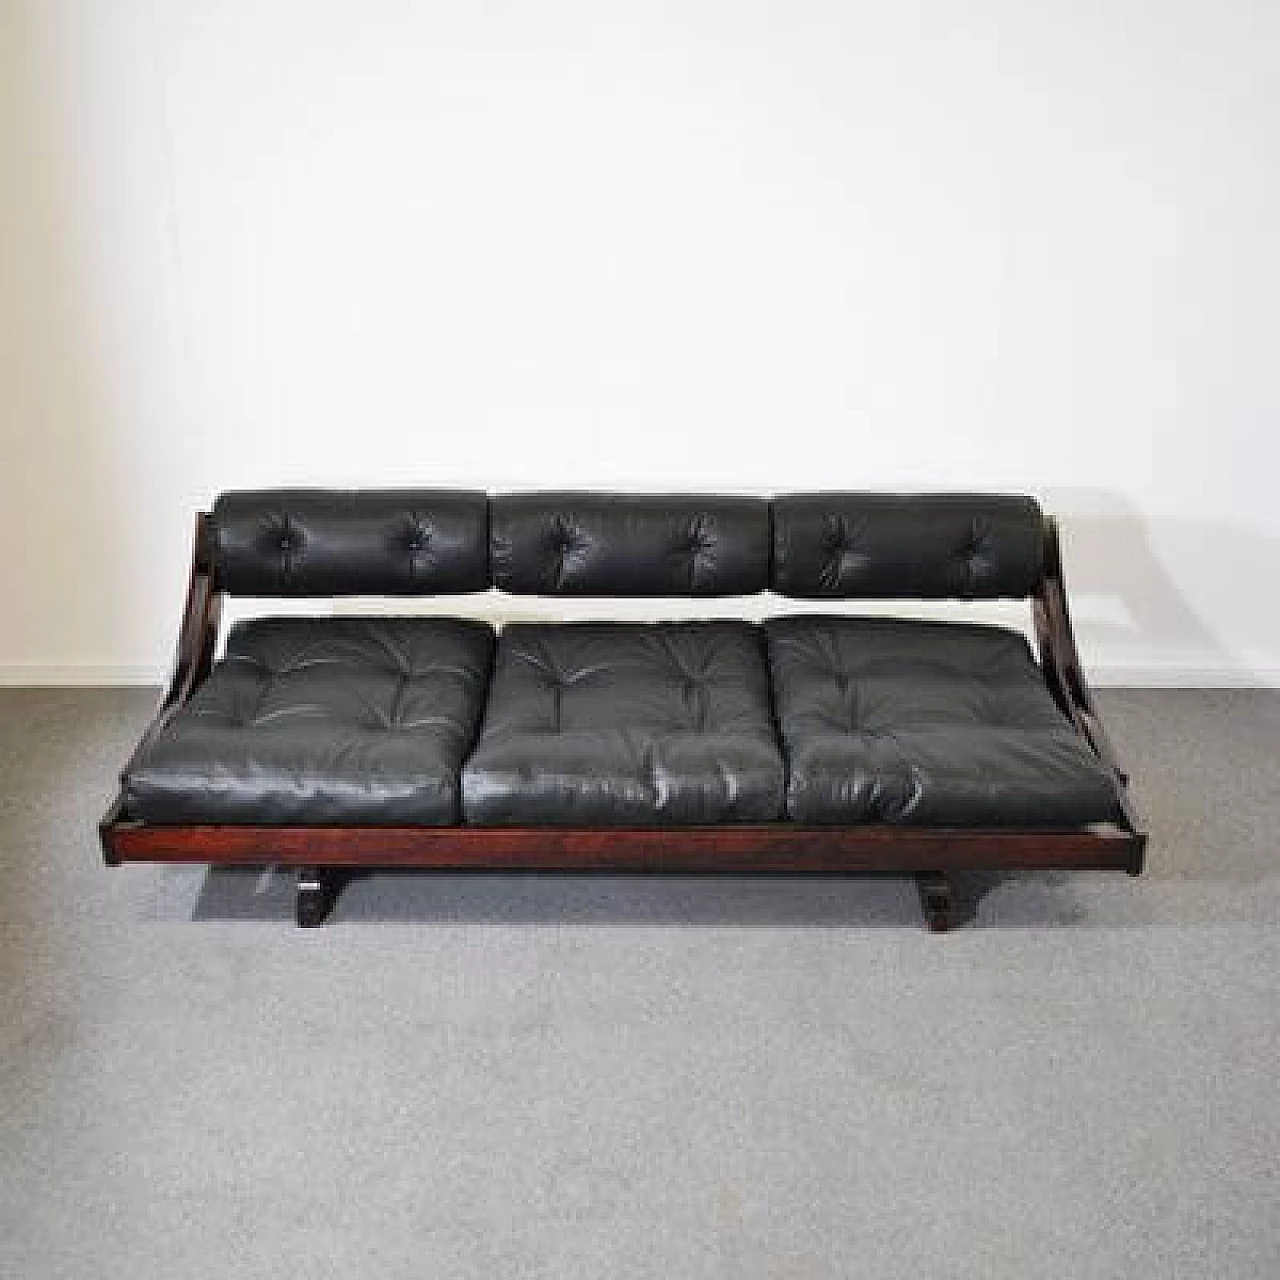 GS195 wooden and leather sofa by Gianni Songia for Luigi Sormani, 1970s 1412266